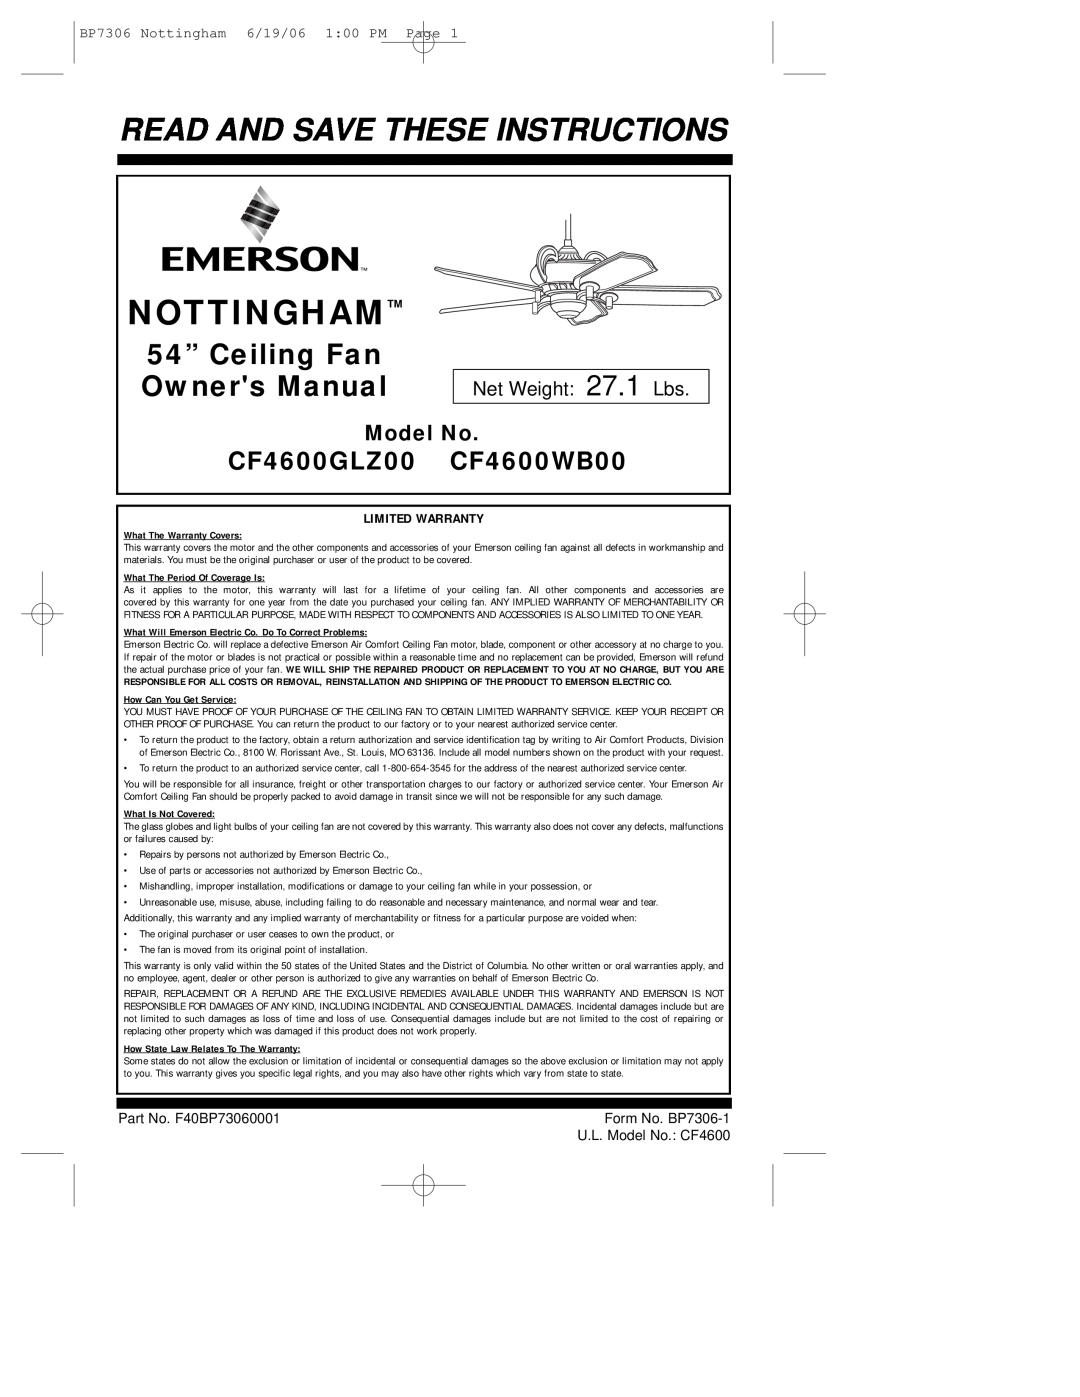 Emerson warranty CF4600GLZ00 CF4600WB00, Model No, Nottingham, Read And Save These Instructions, Net Weight 27.1 Lbs 